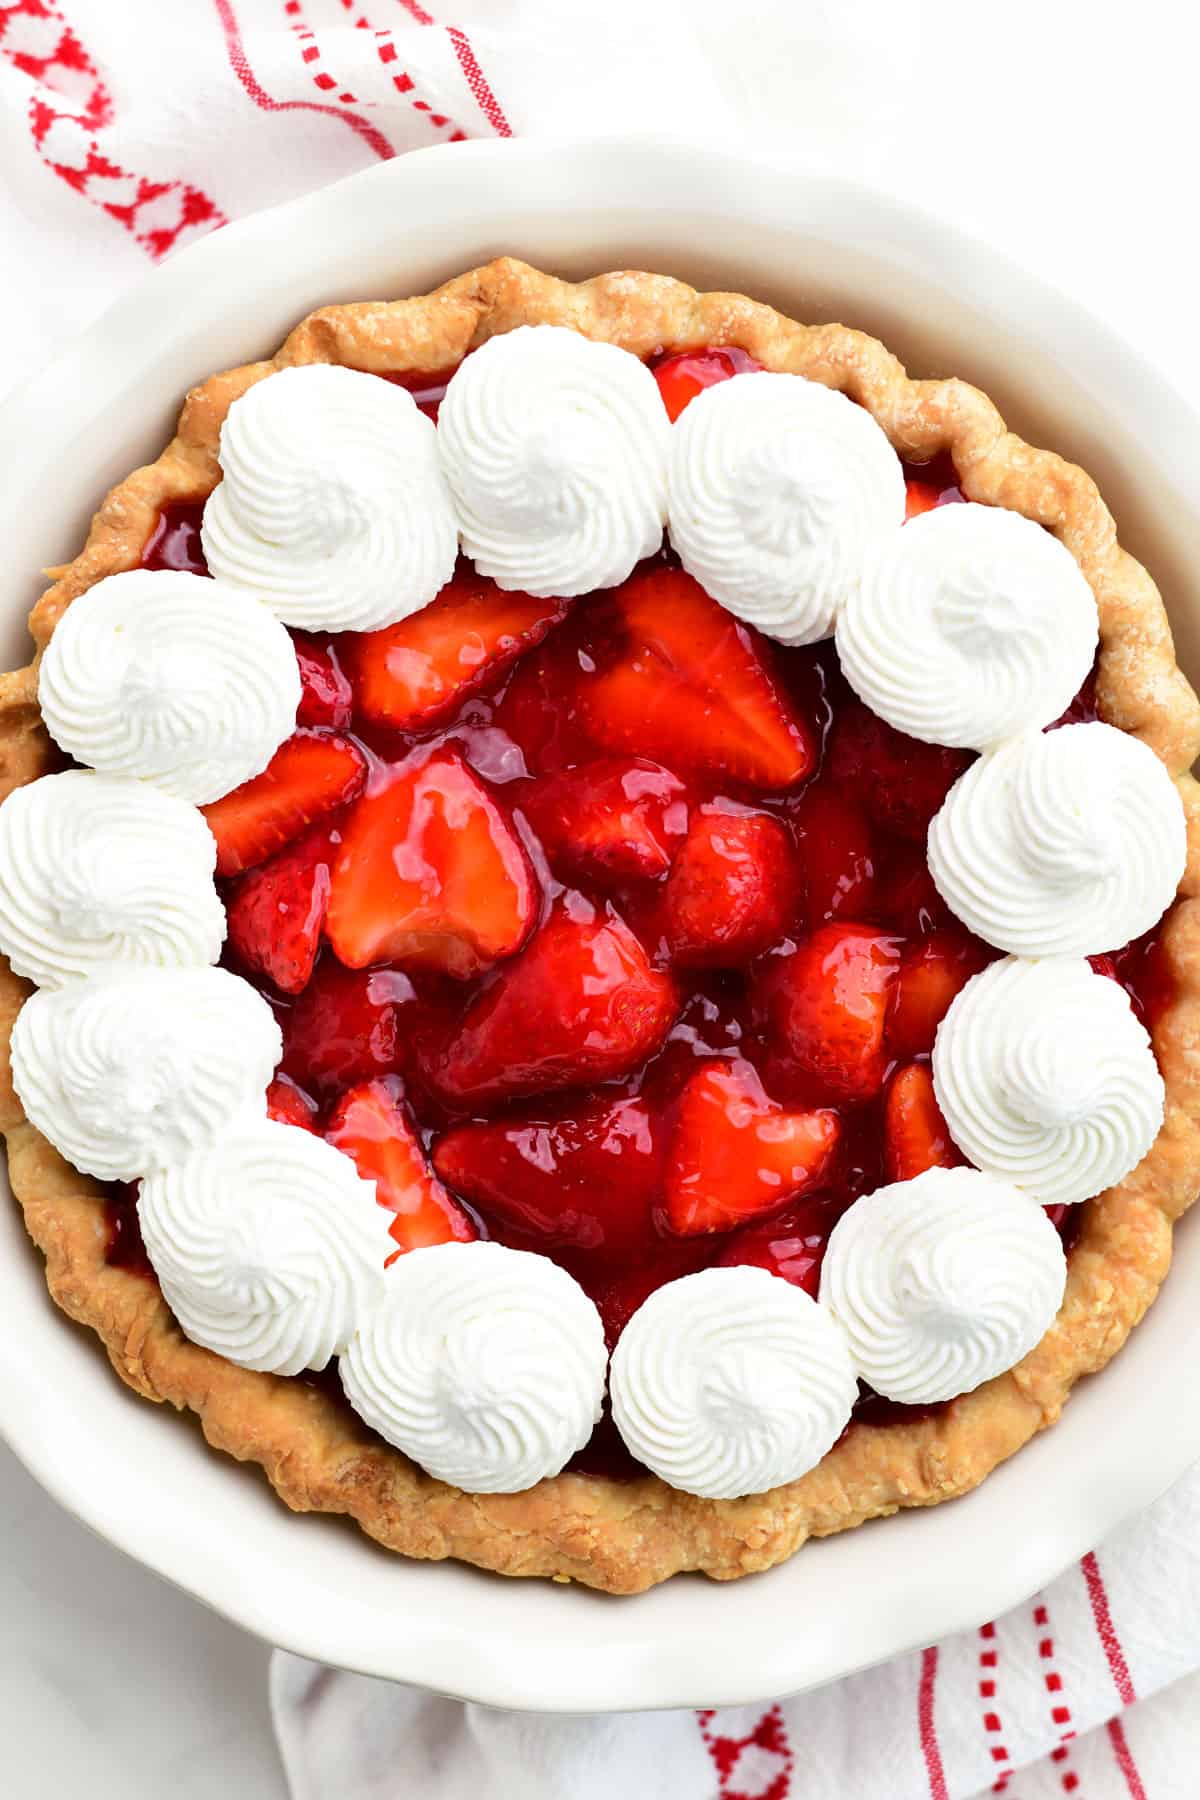 a strawberry pie with whipped cream dollops on top